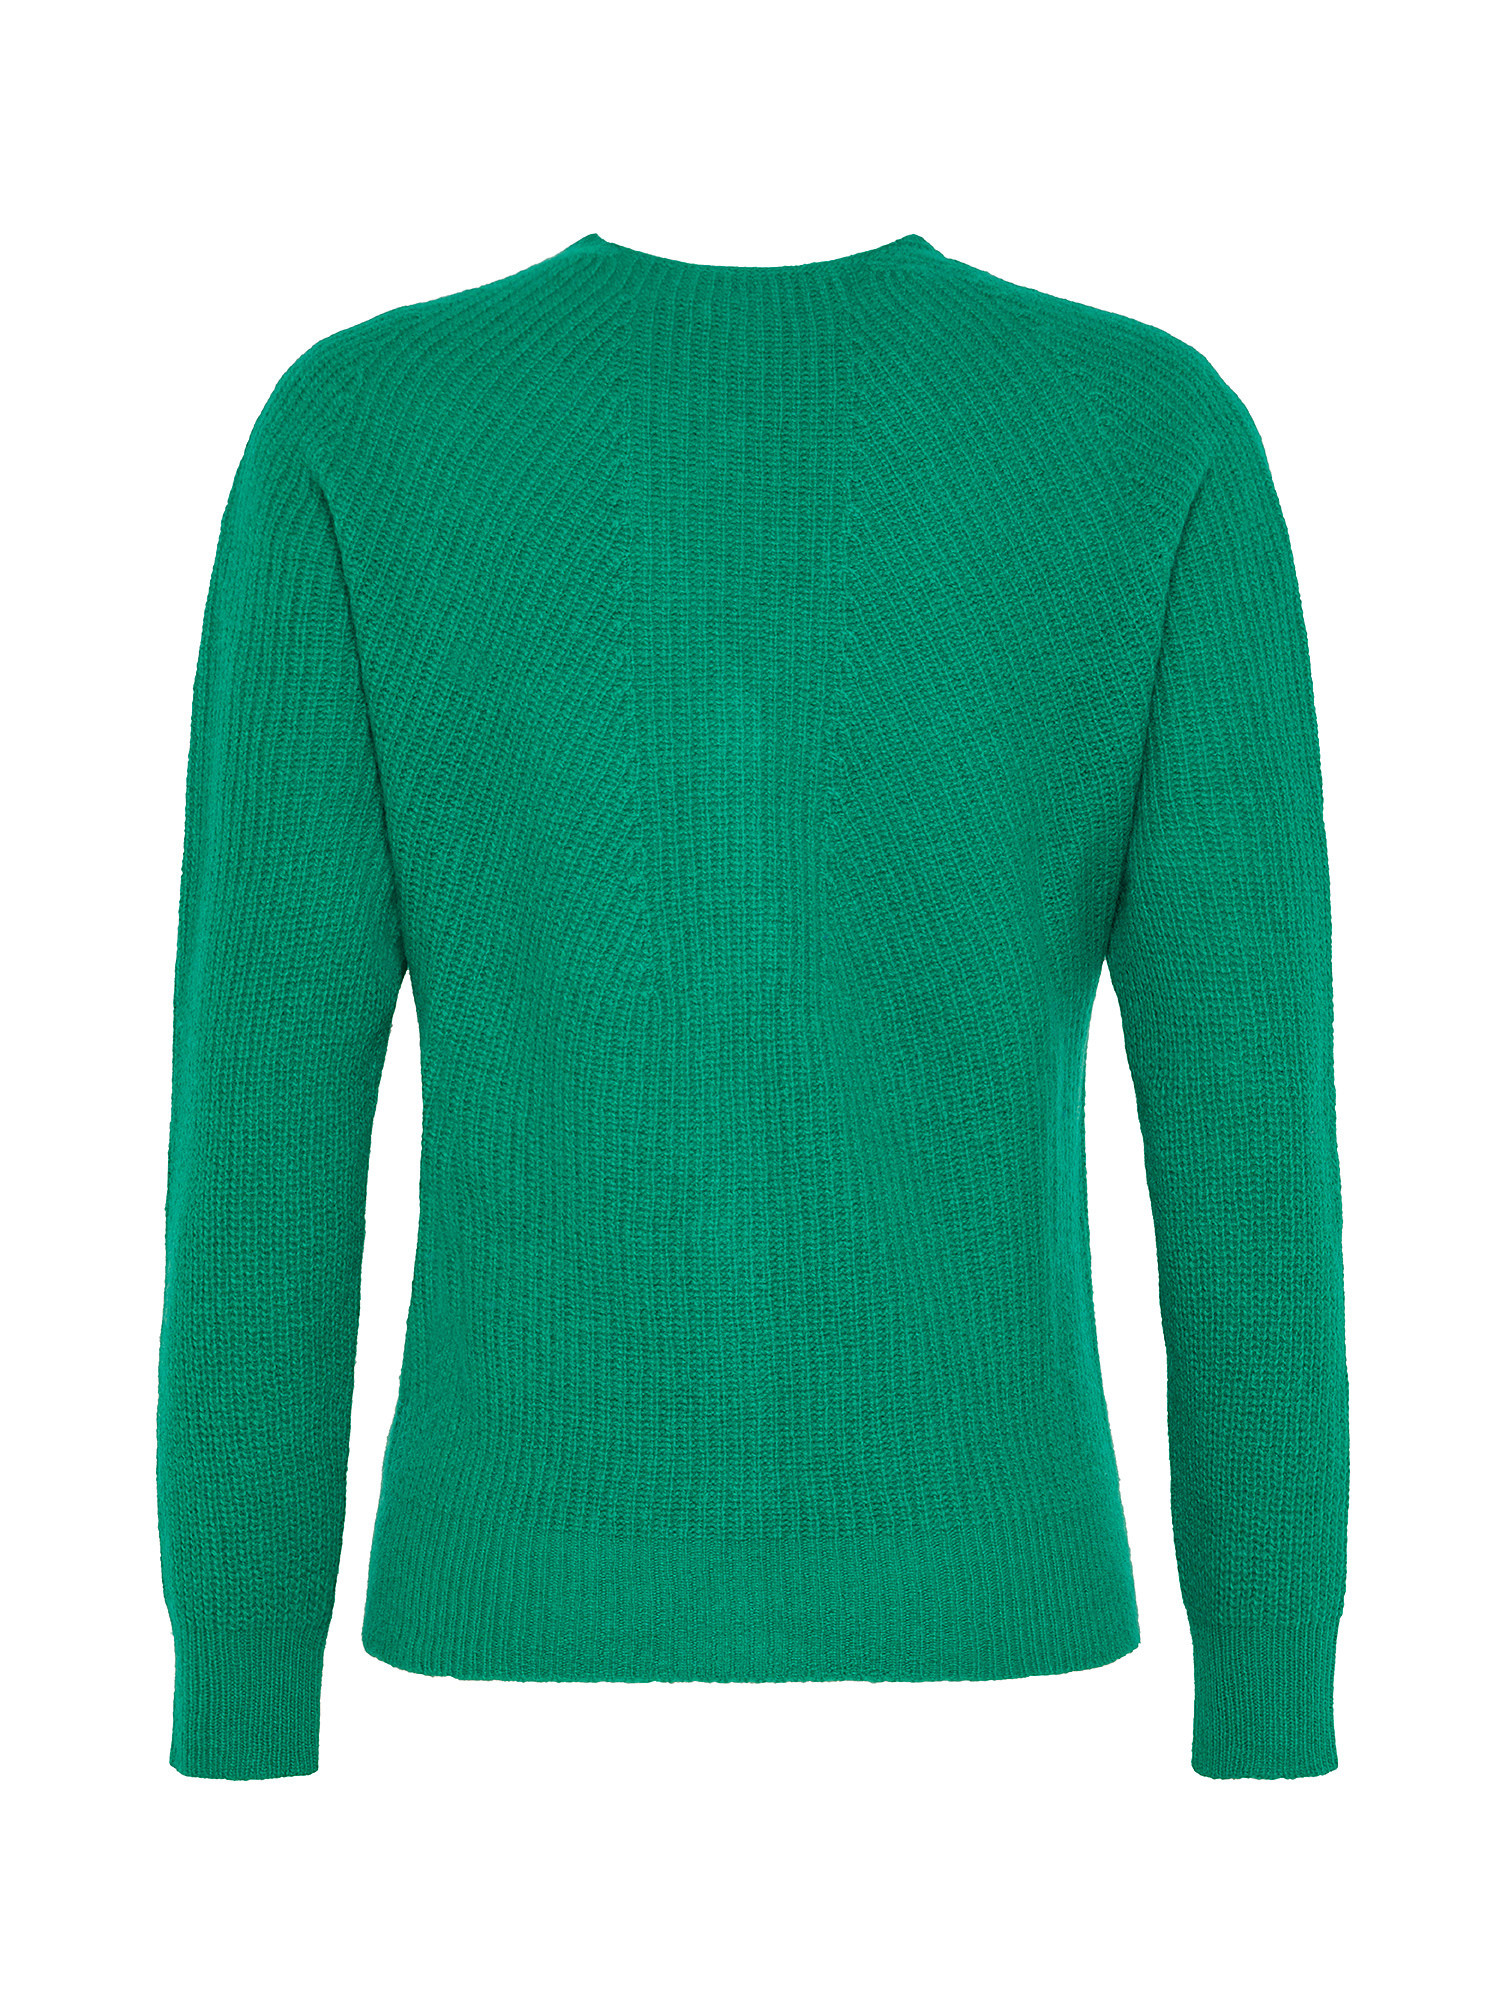 K Collection - Cardigan, Green, large image number 1